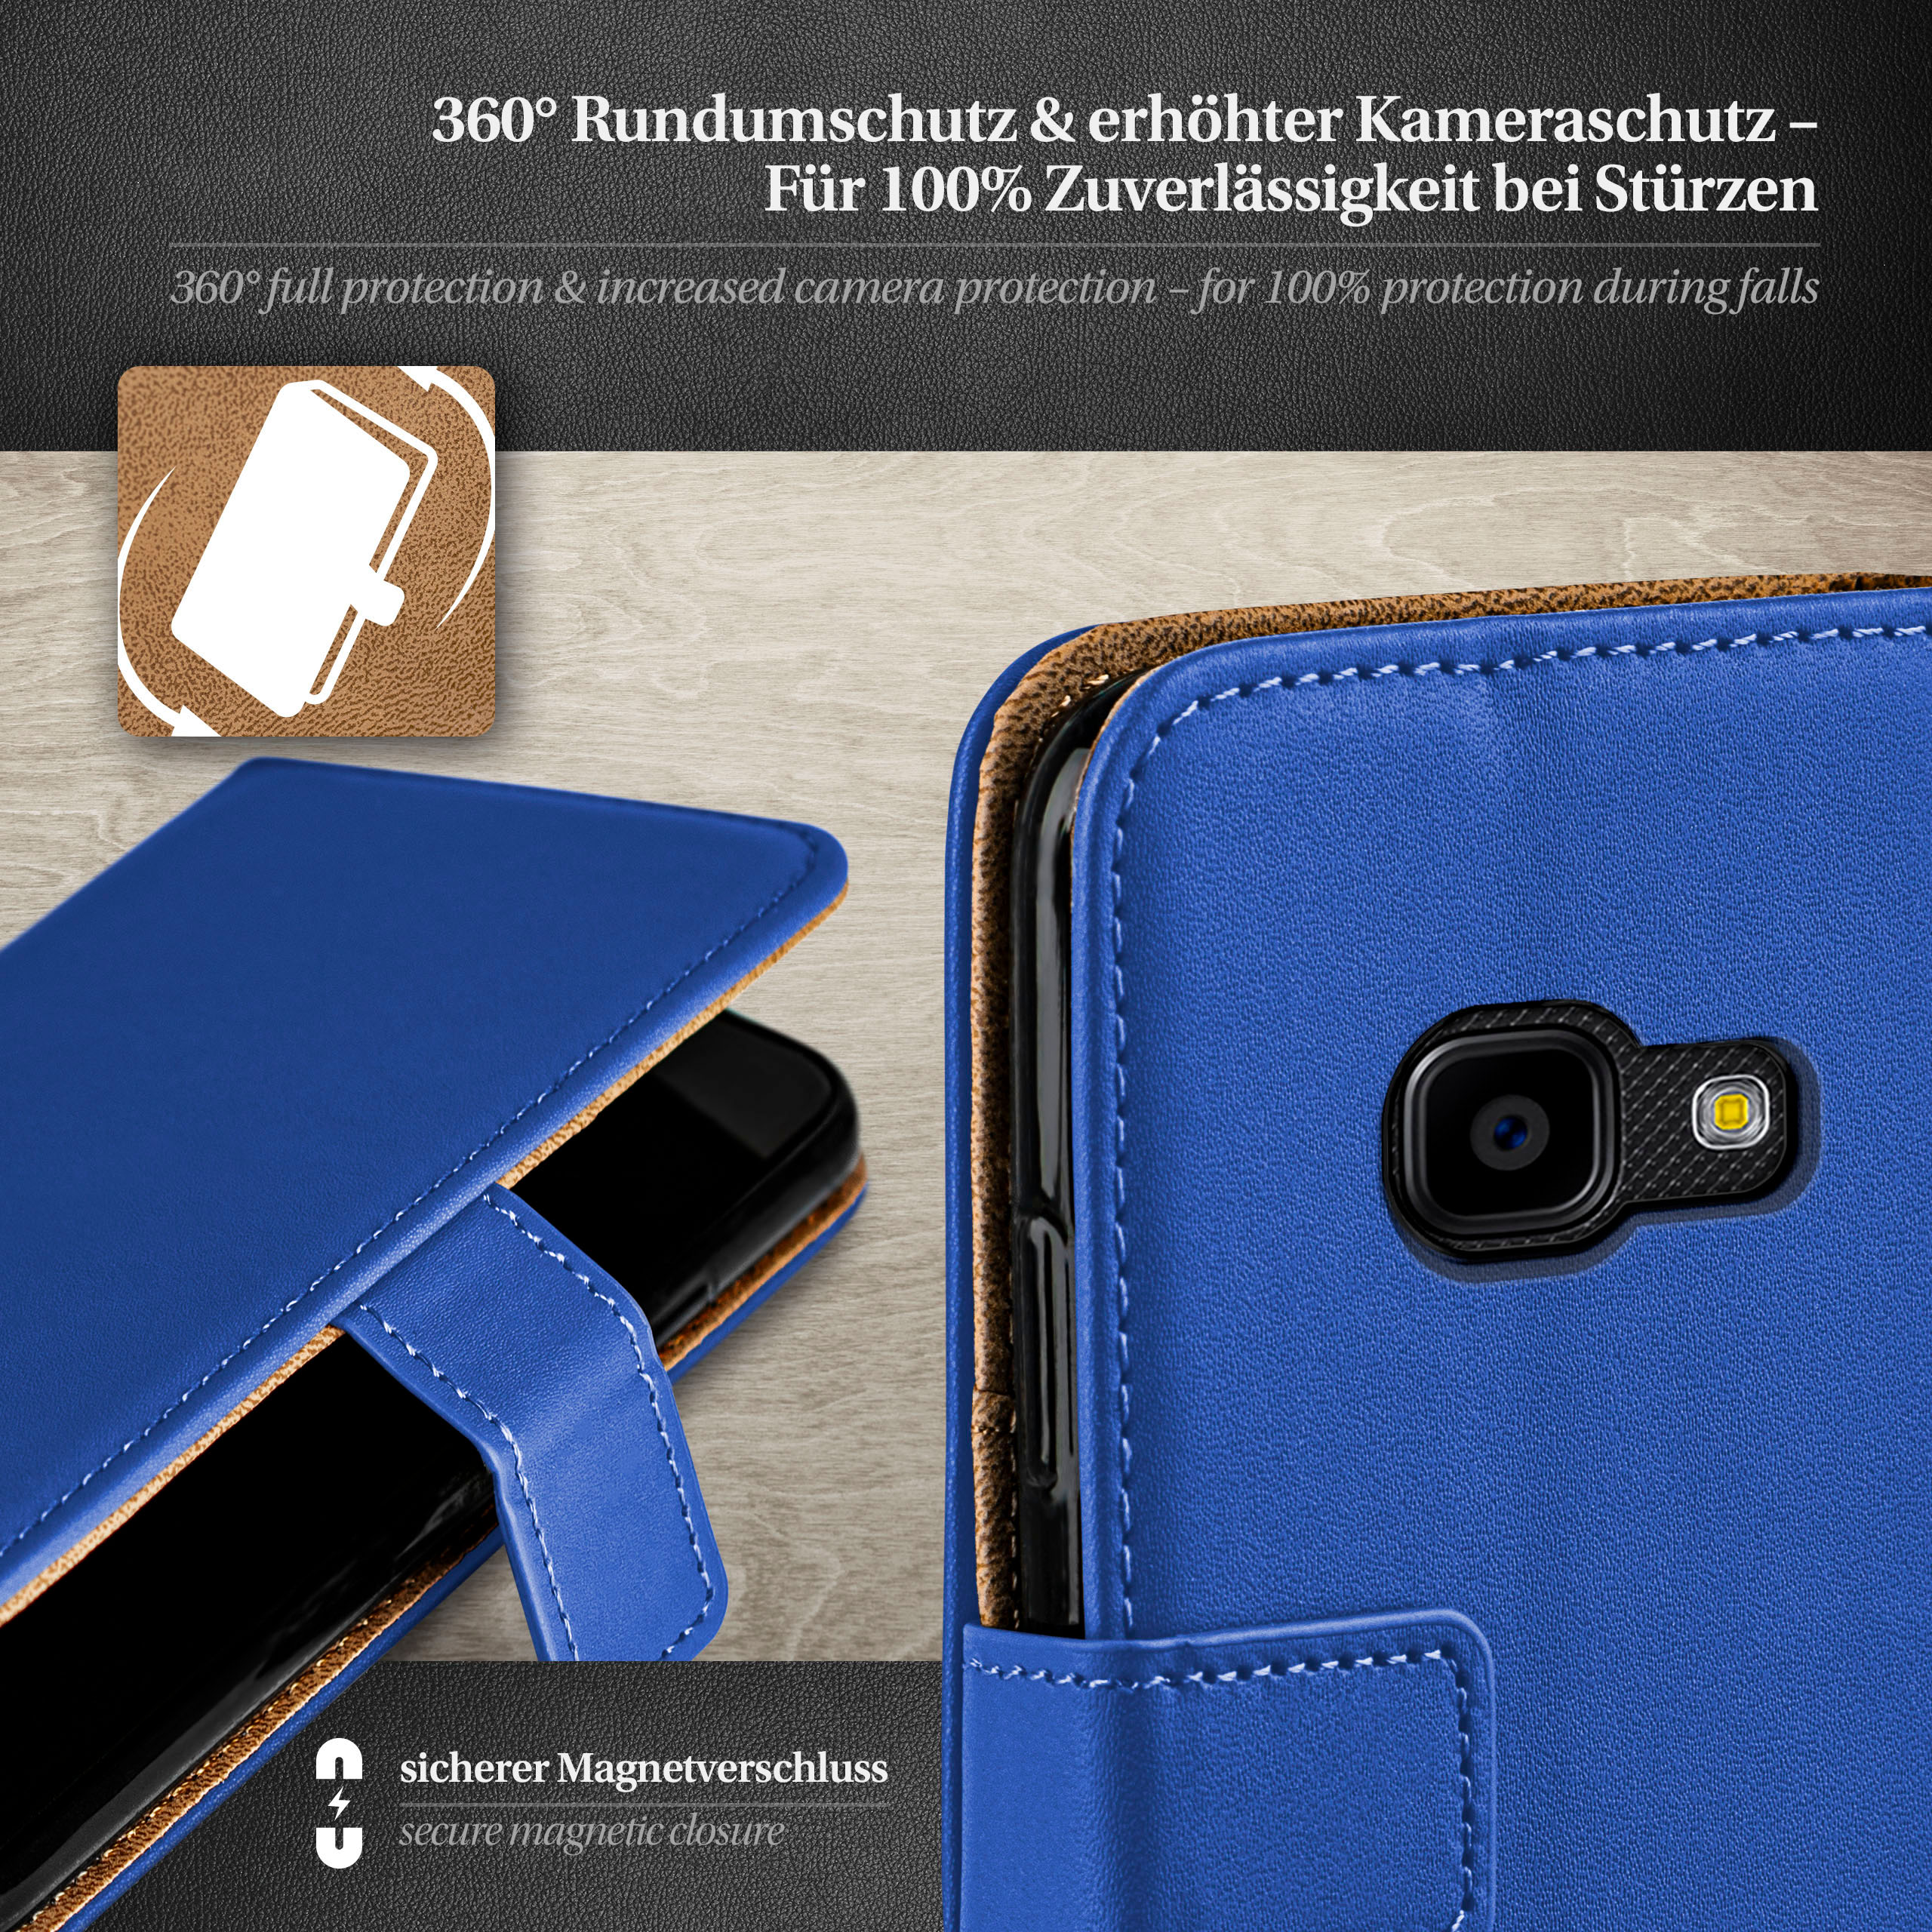 4, MOEX Book Royal-Blue Samsung, Xcover Bookcover, Case, Galaxy